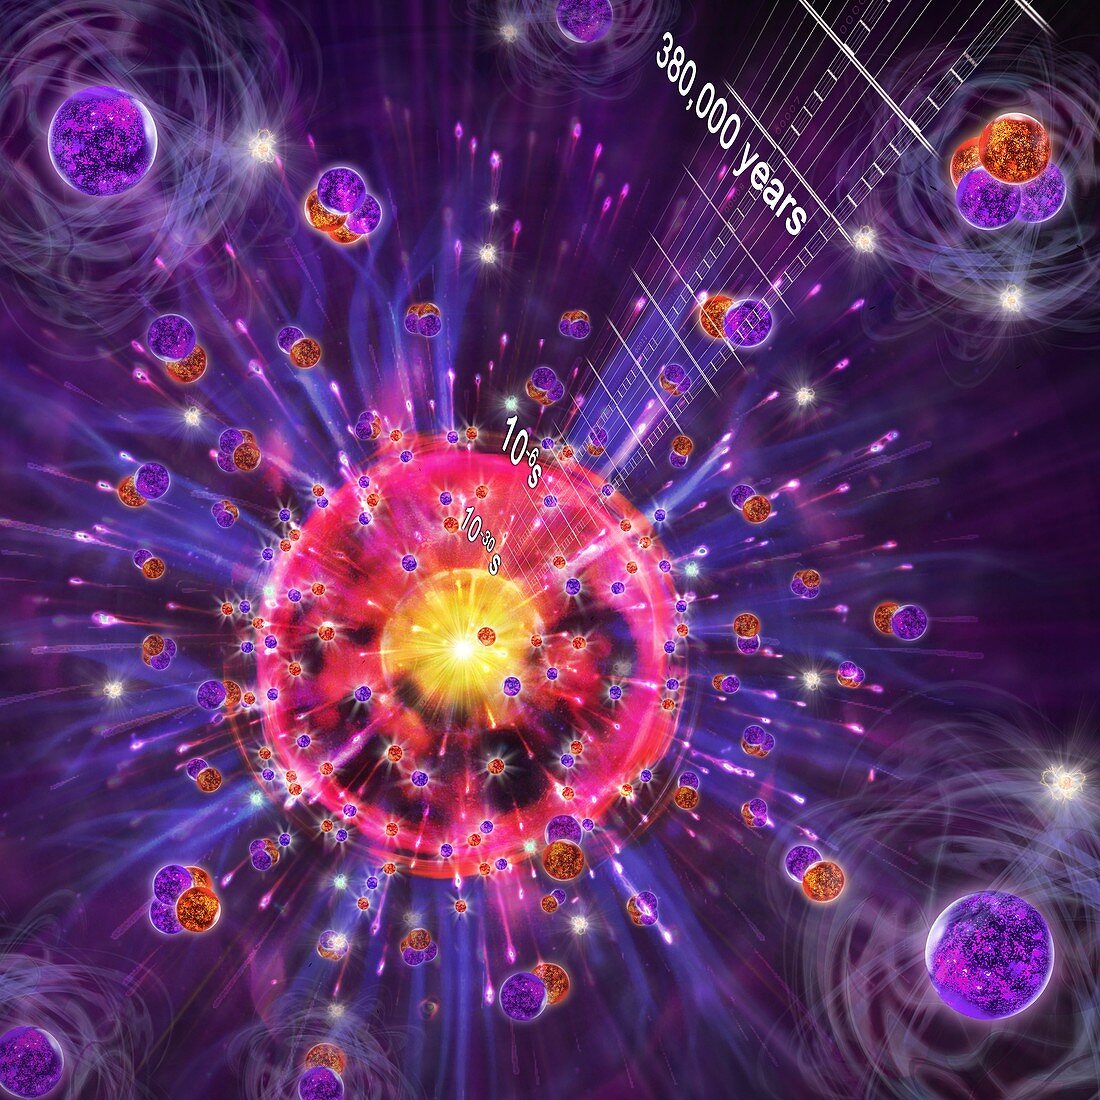 Big Bang,stages of early universe